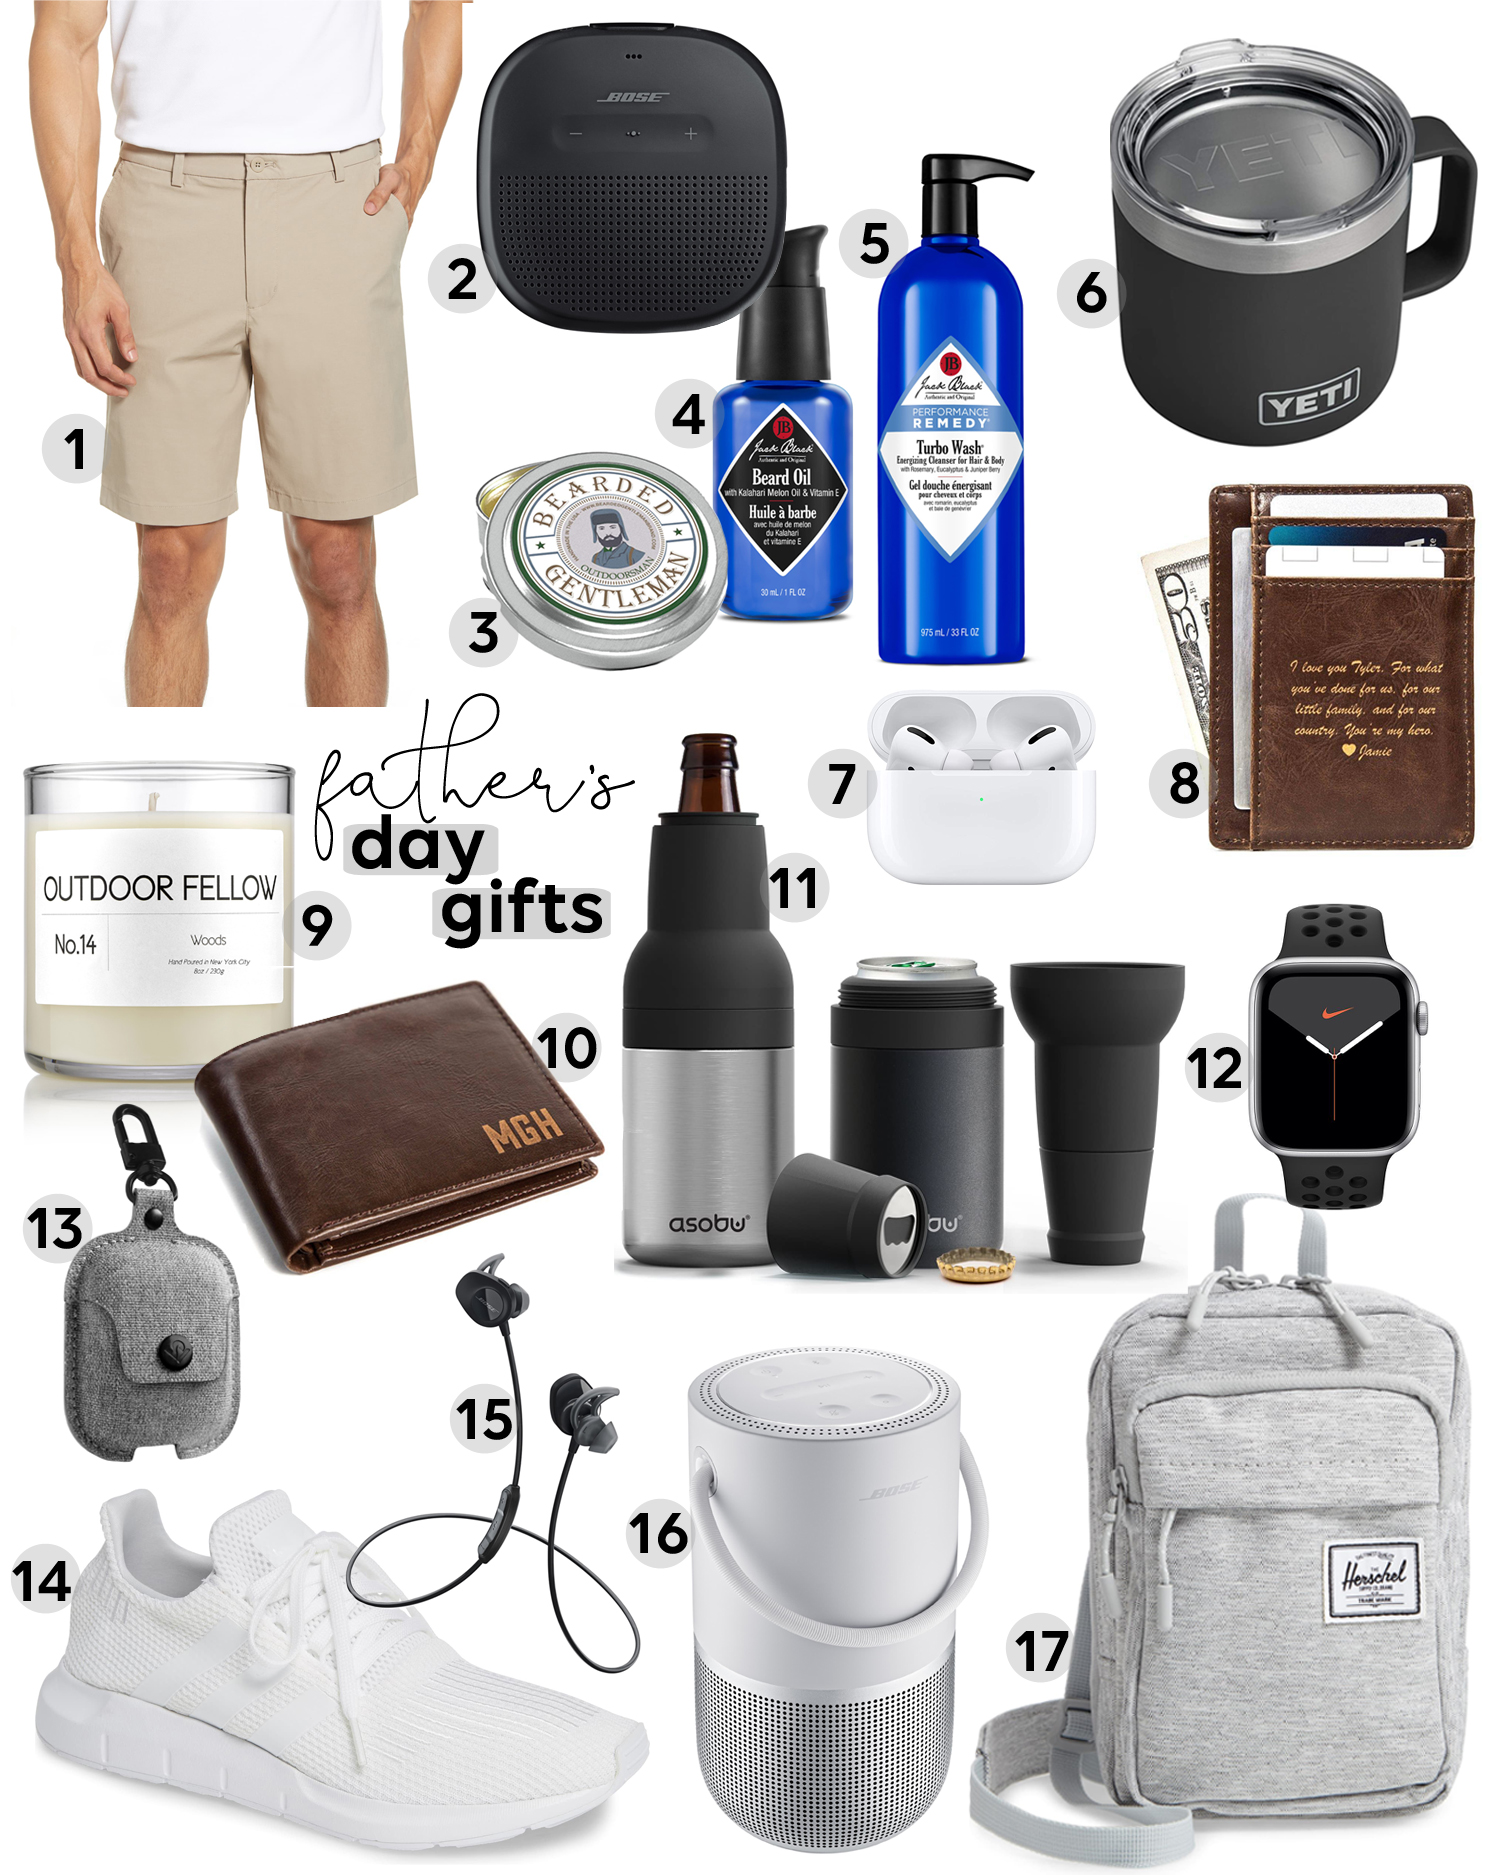 https://www.southerncurlsandpearls.com/wp-content/uploads/2020/06/fathers-day-gift-guide.jpg